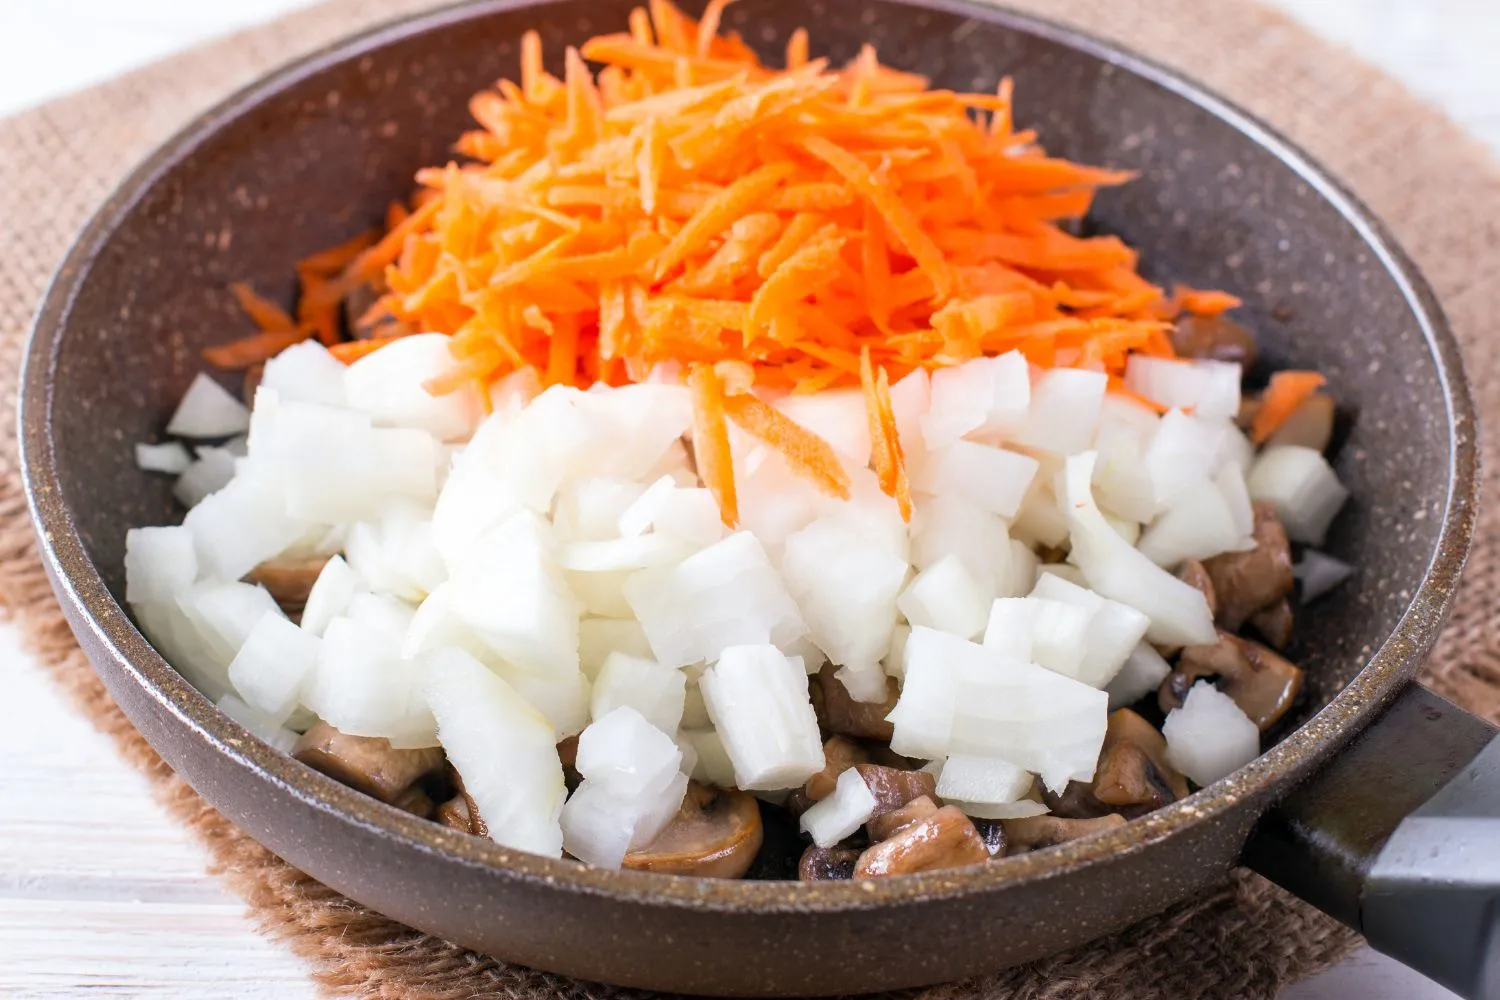 Slices of onions and carrots in a pan